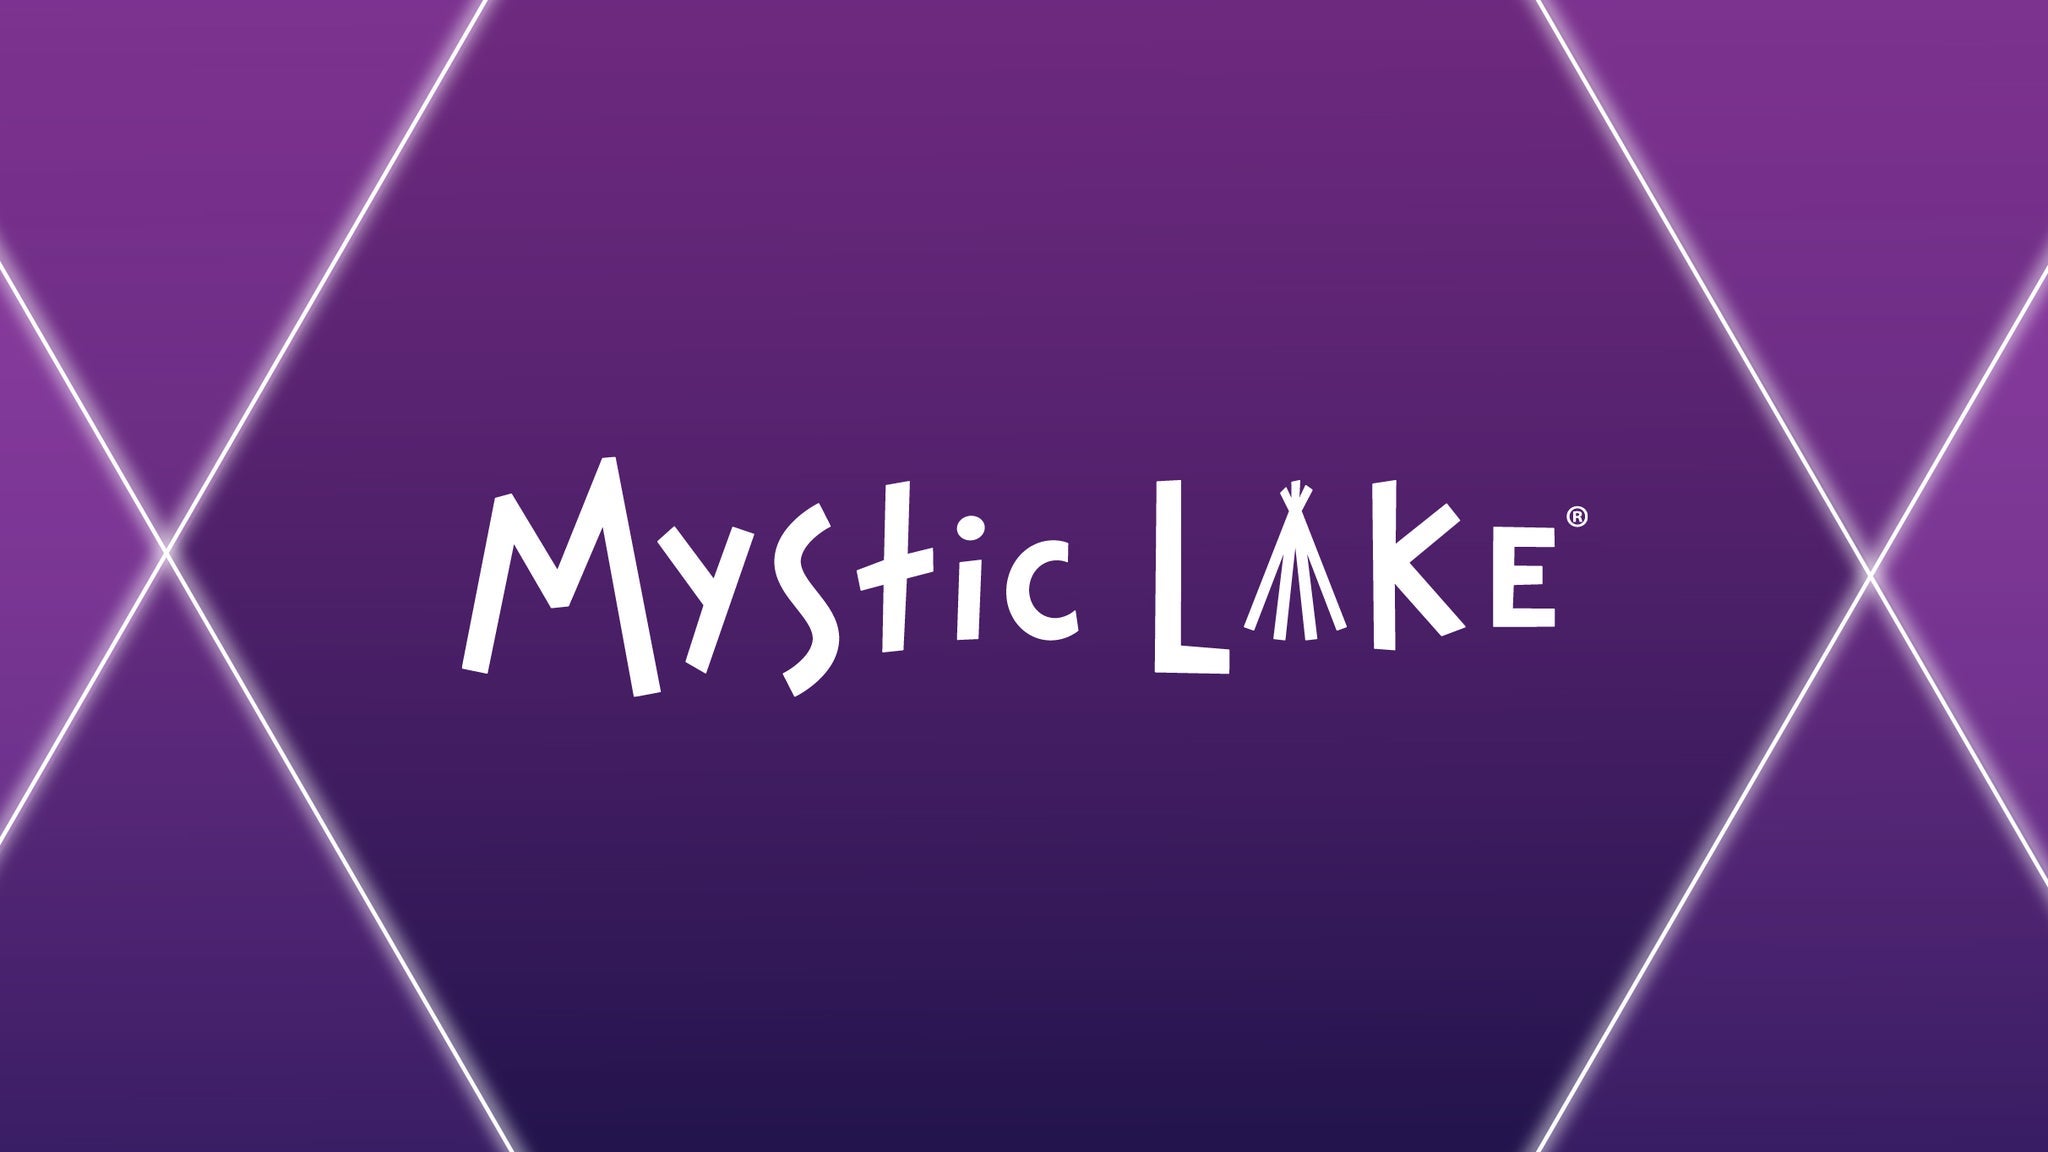 Rock, Brats & Beer - 2 Day Package in Prior Lake promo photo for Mystic Email presale offer code